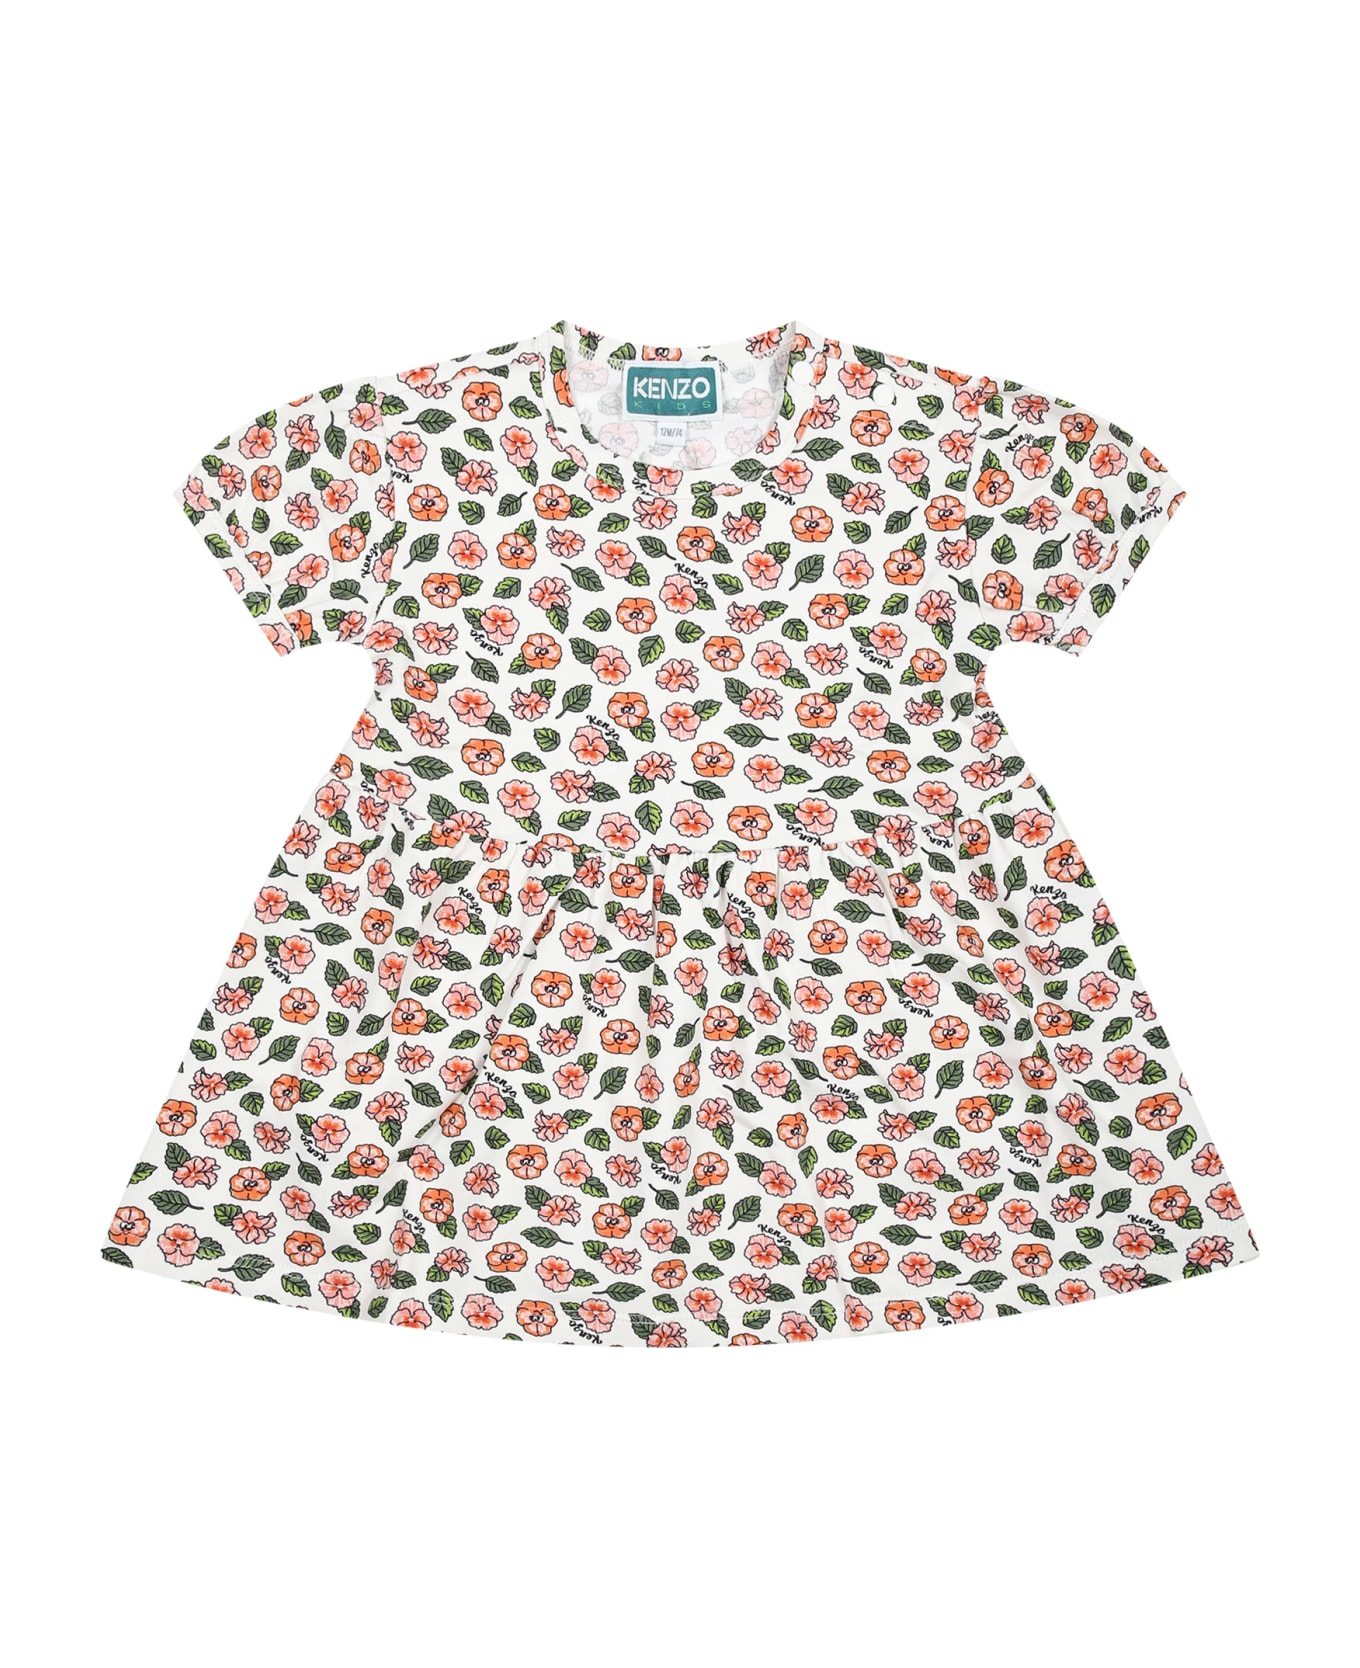 Kenzo Kids White Dress For Baby With Floral Print - White